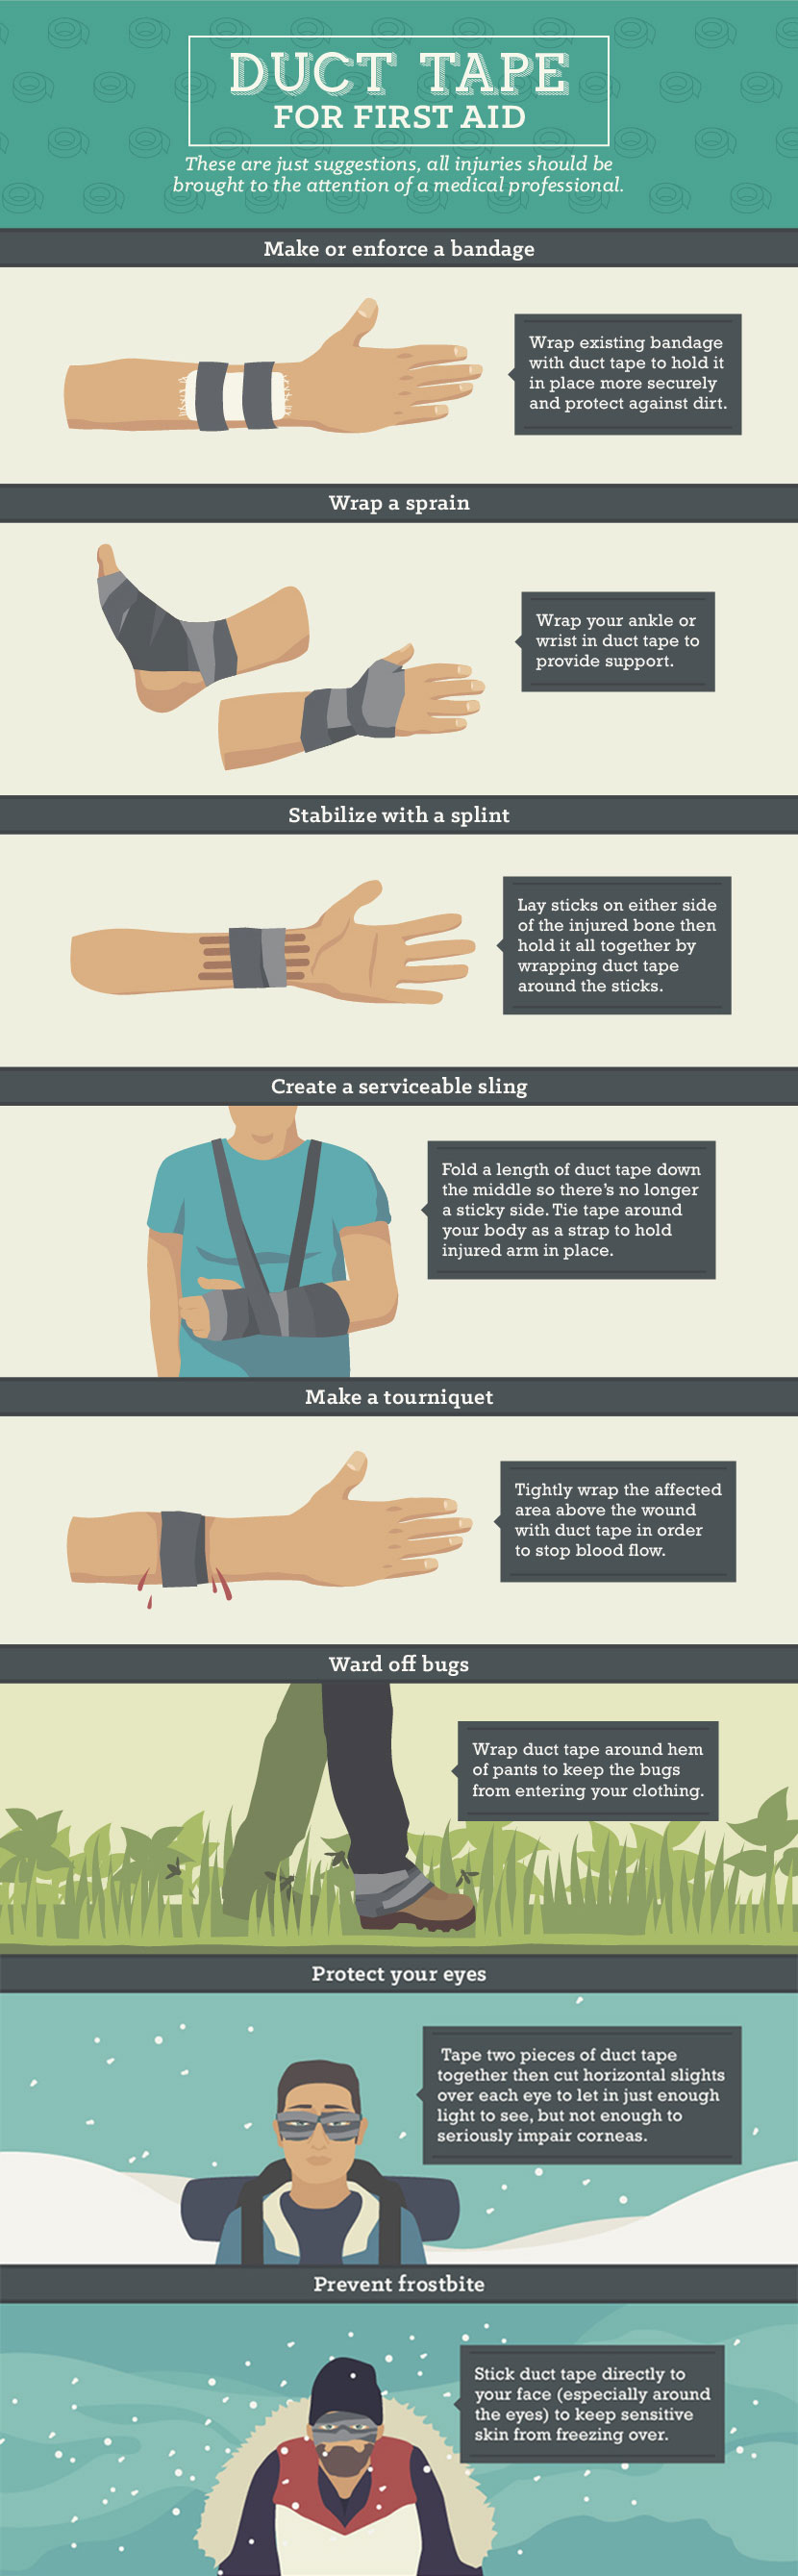 Duct Tape Guide - Using Duct Tape for First Aid